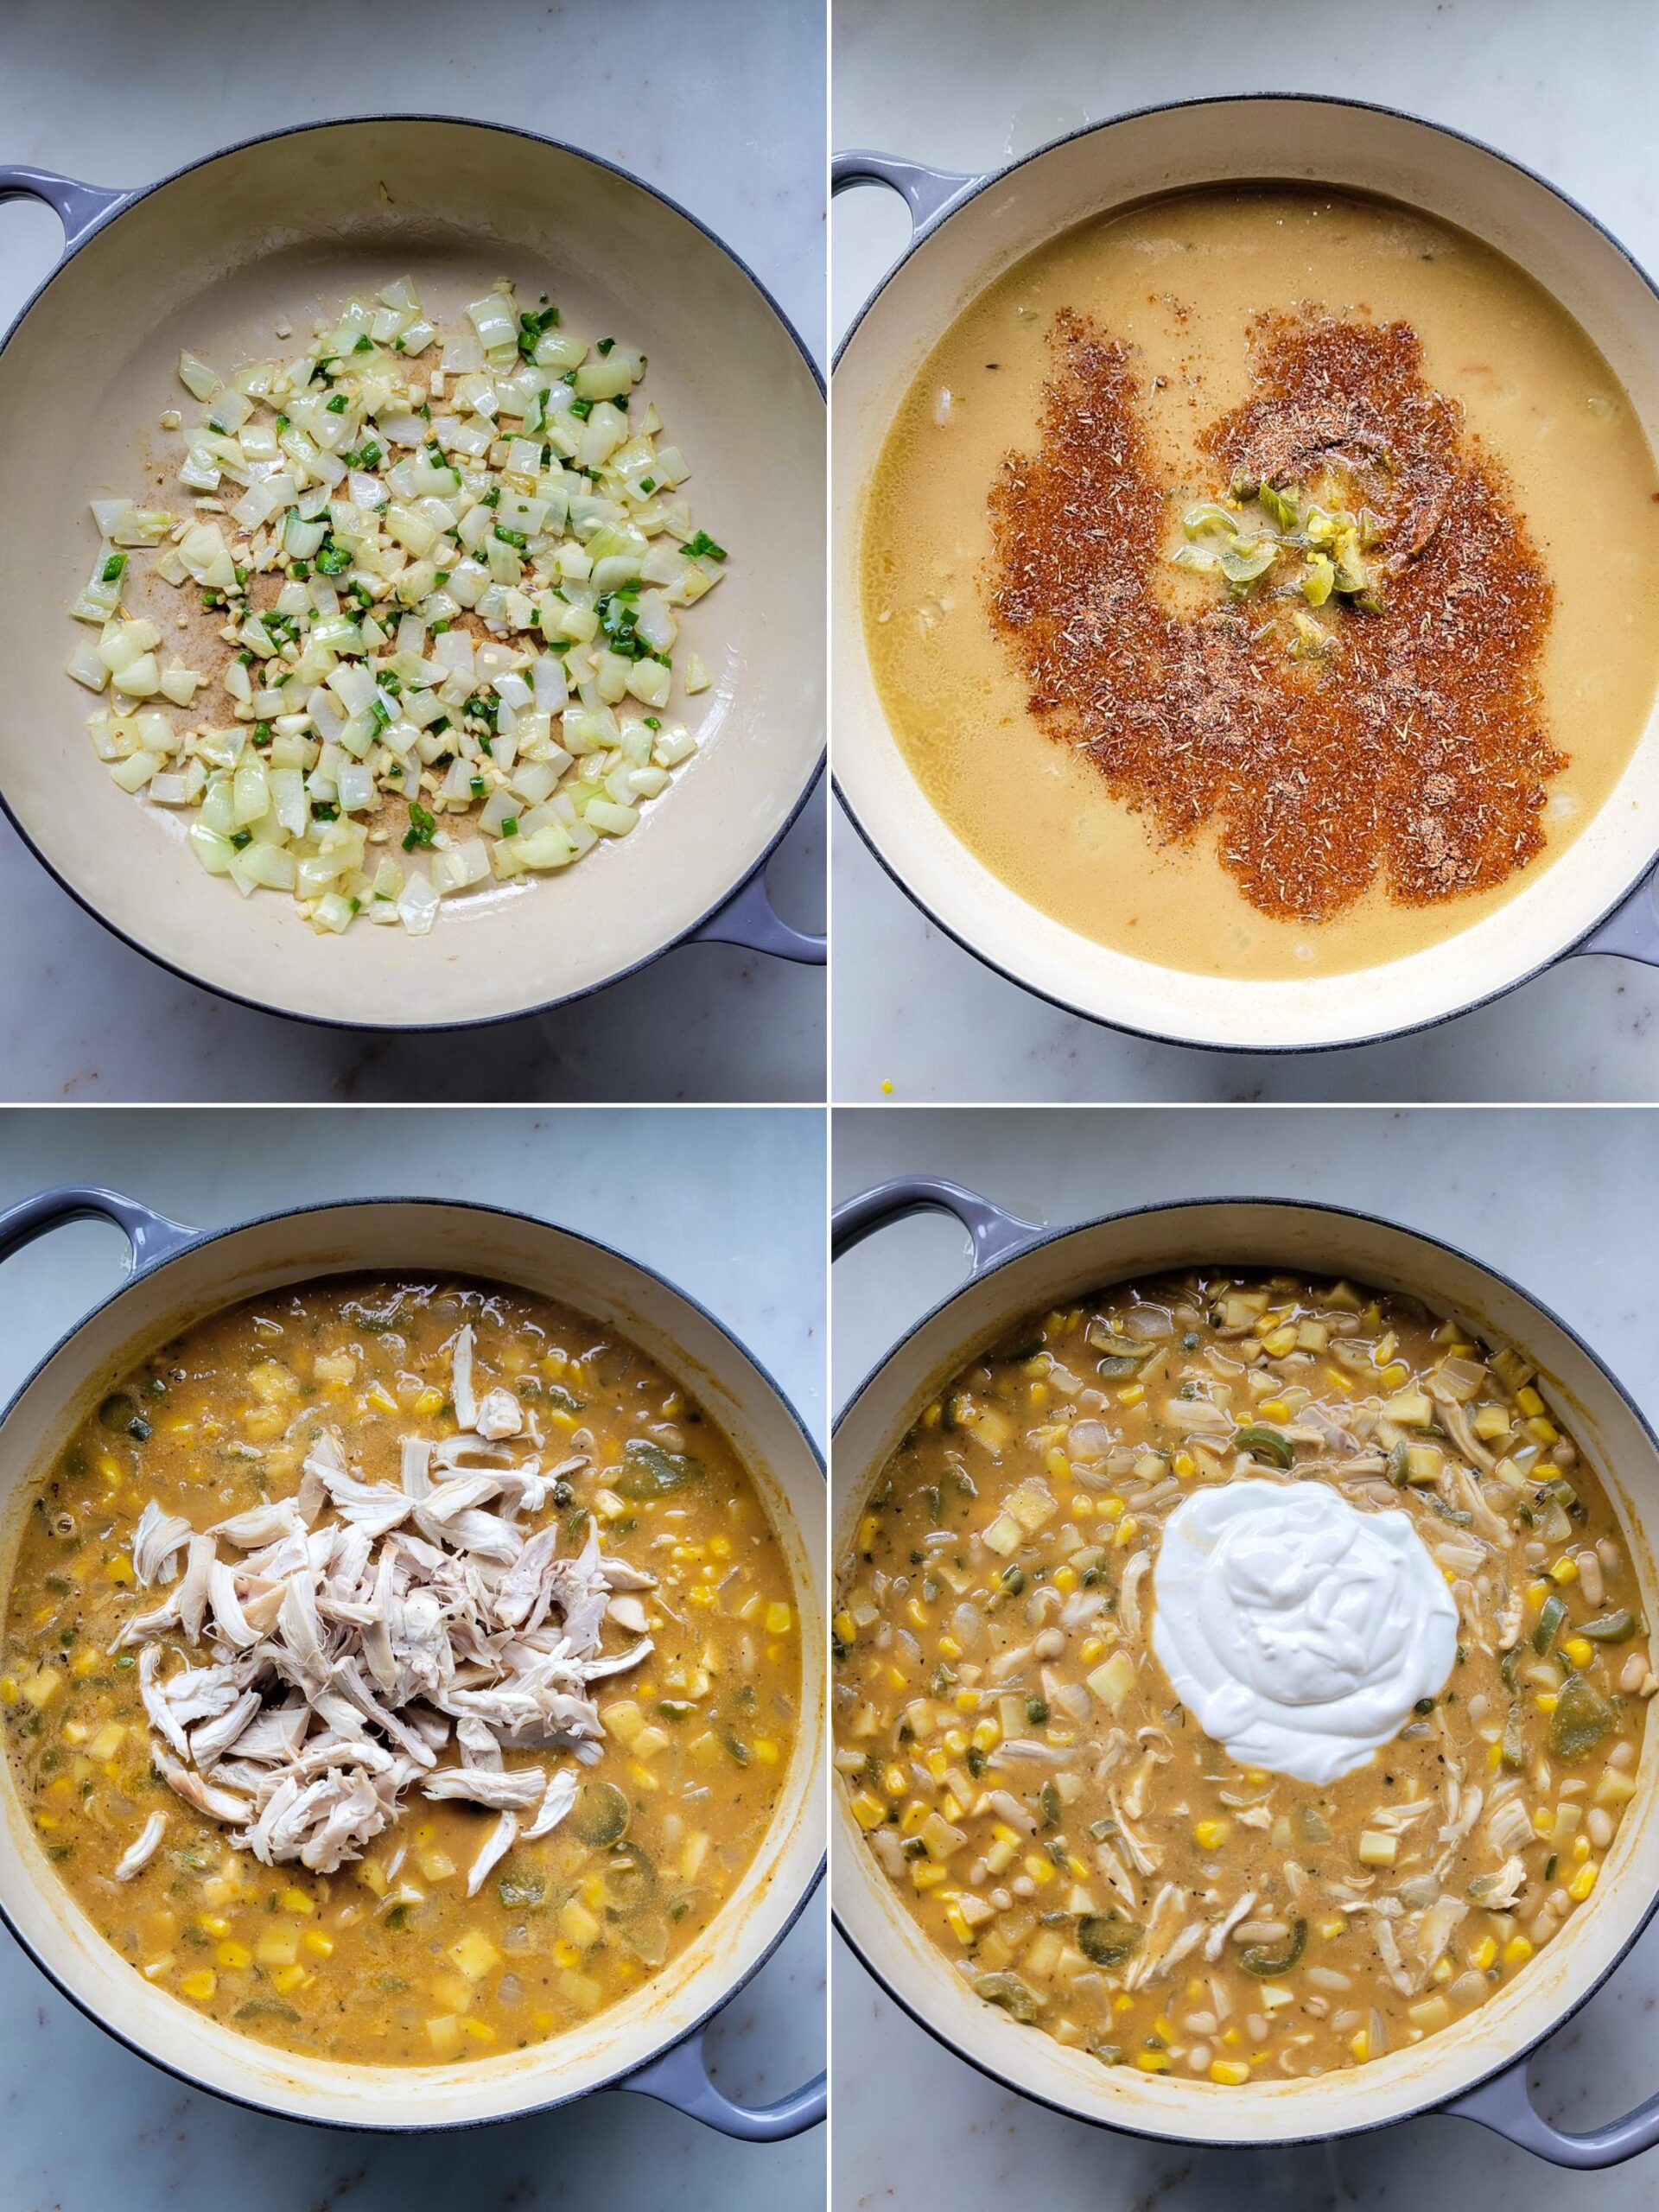 Collage showing the different stages of making White Creole Chicken and Bean Chilli.